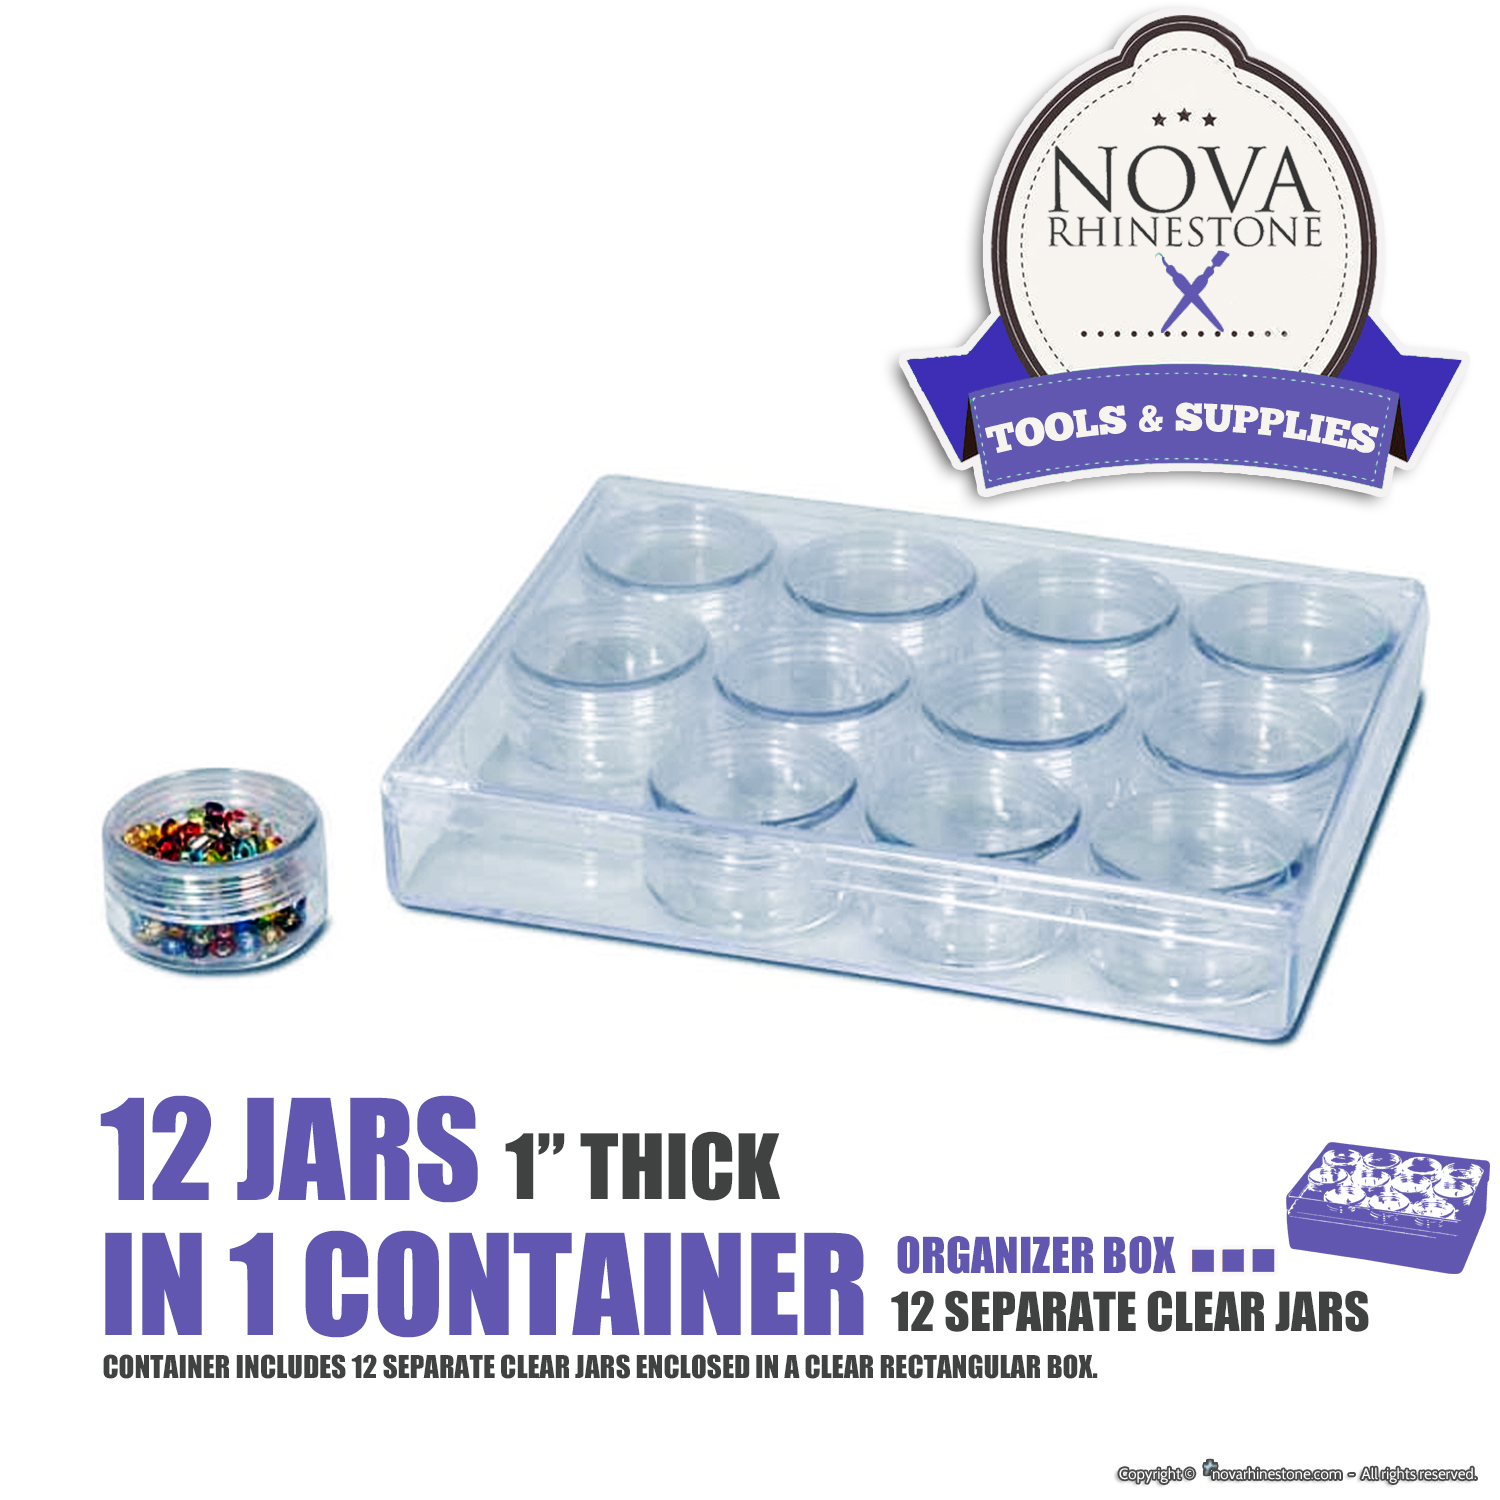 12 jars in 1 container